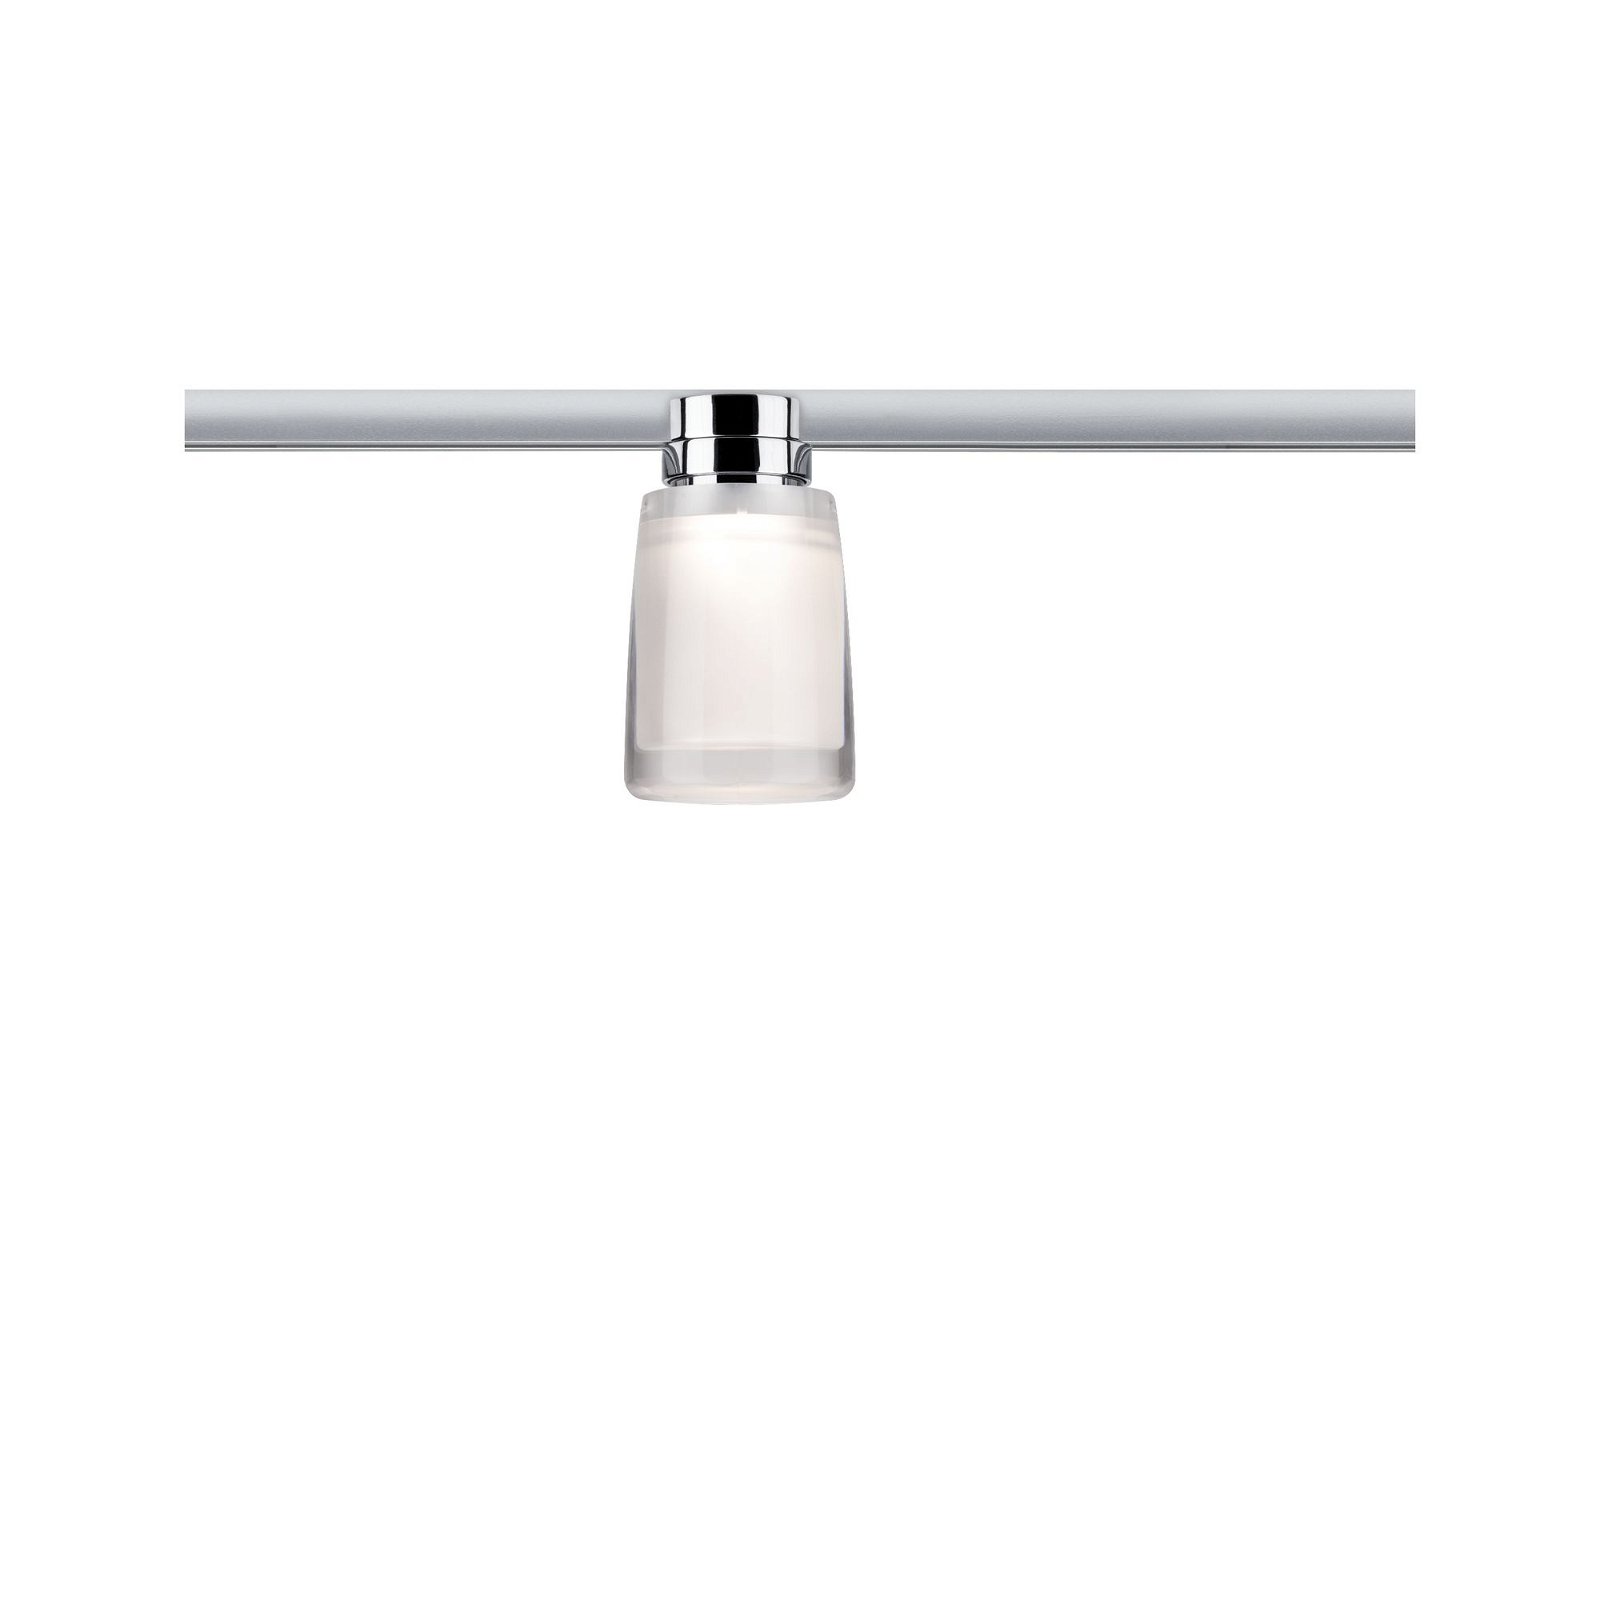 Safira URail LED ceiling spot 5.2 W Chrome/clear/satin dimmable